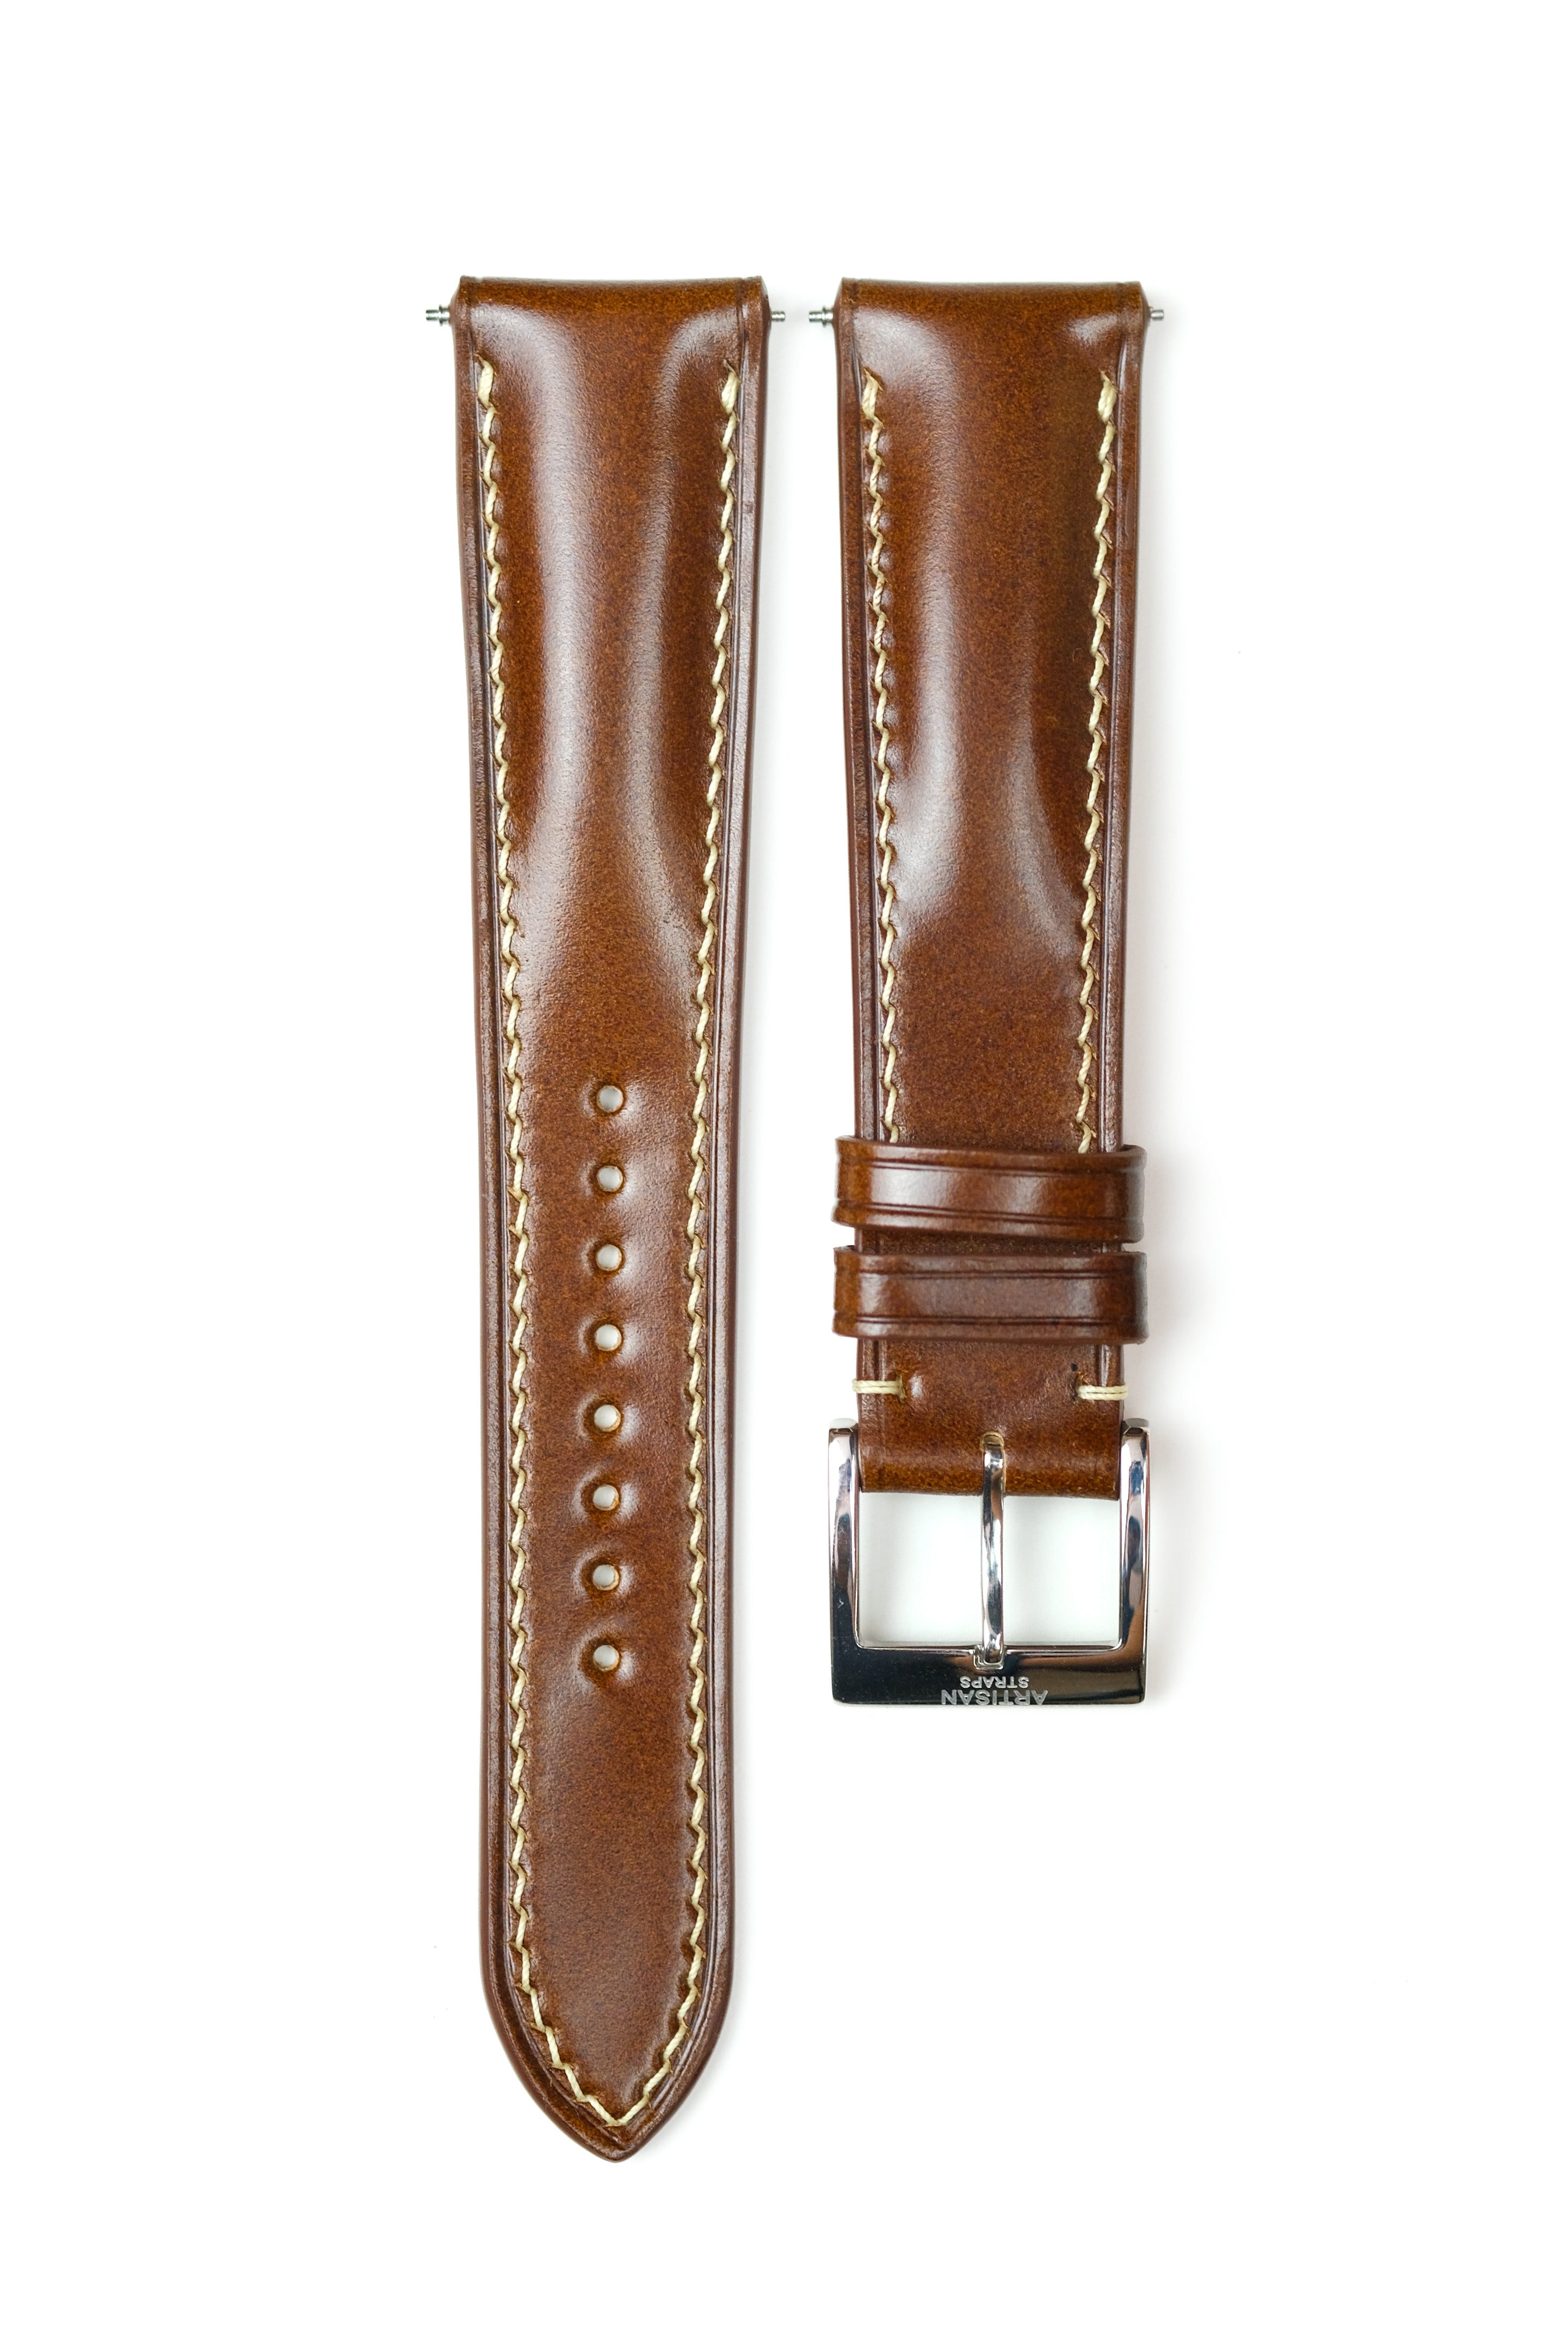 Cognac Shell Cordovan (Padded) Leather Strap - Artisan Straps